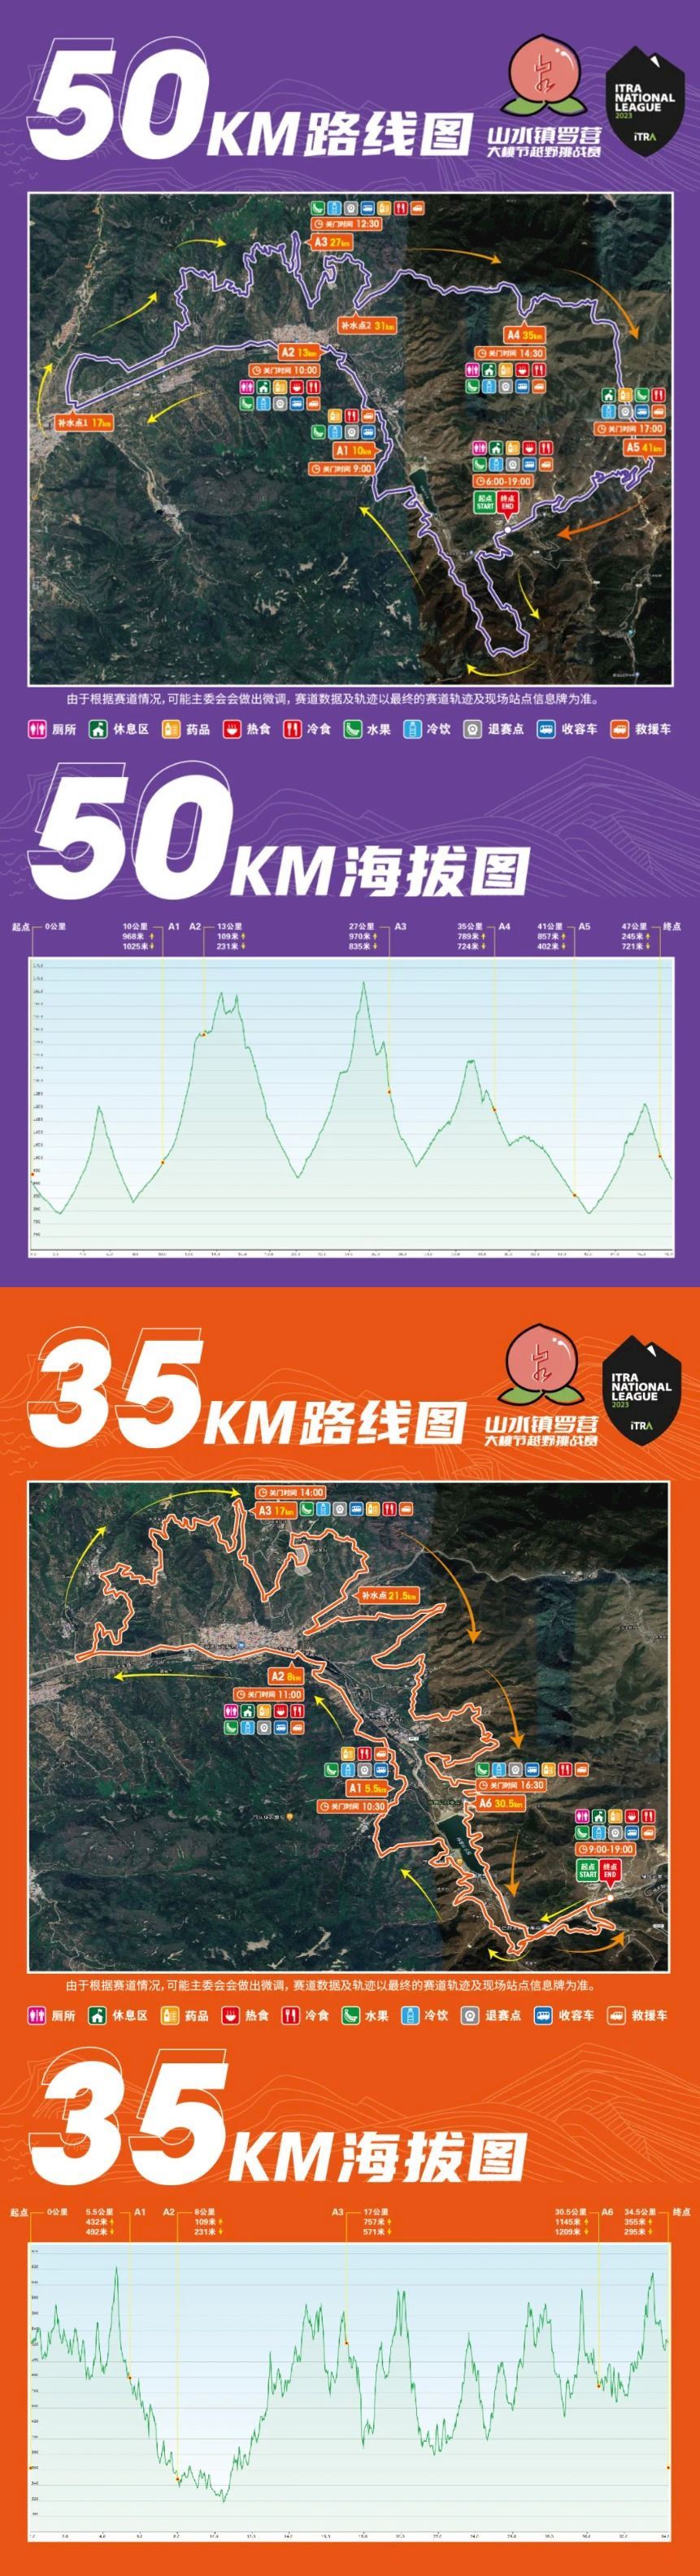 Beijing Zhenluoying Trail Challenge Route Map